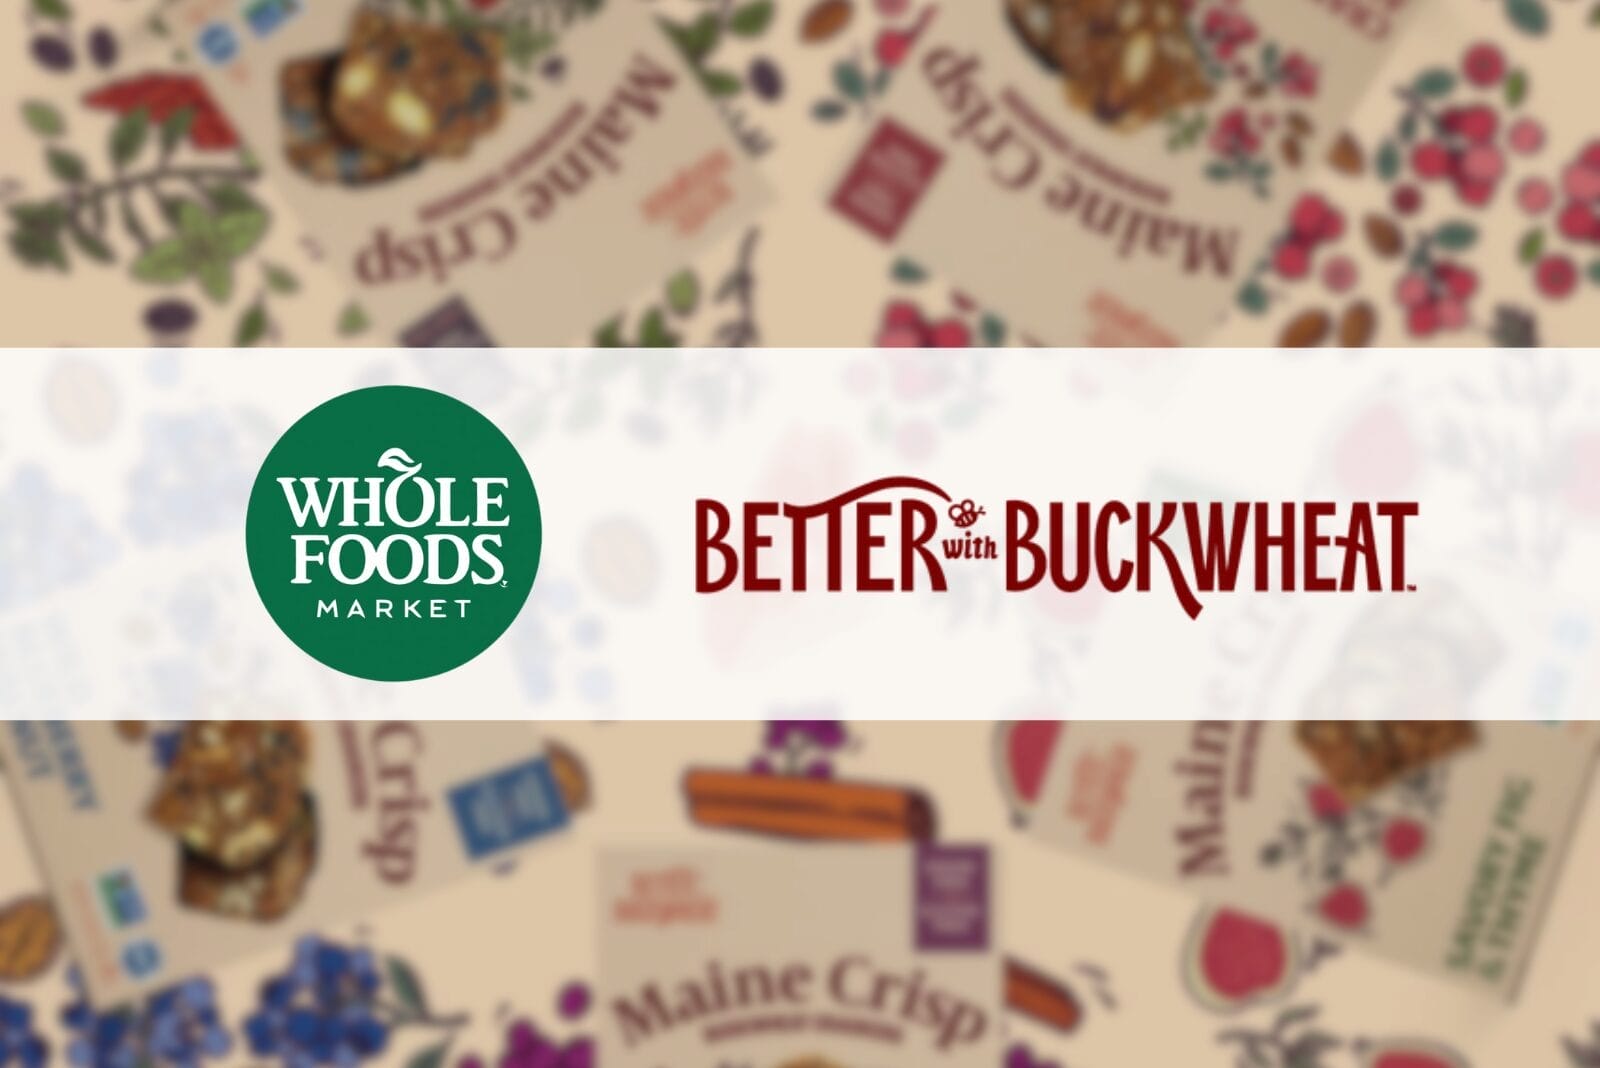 Better With Buckwheat and Whole Foods logo in front of Maine crisps packages